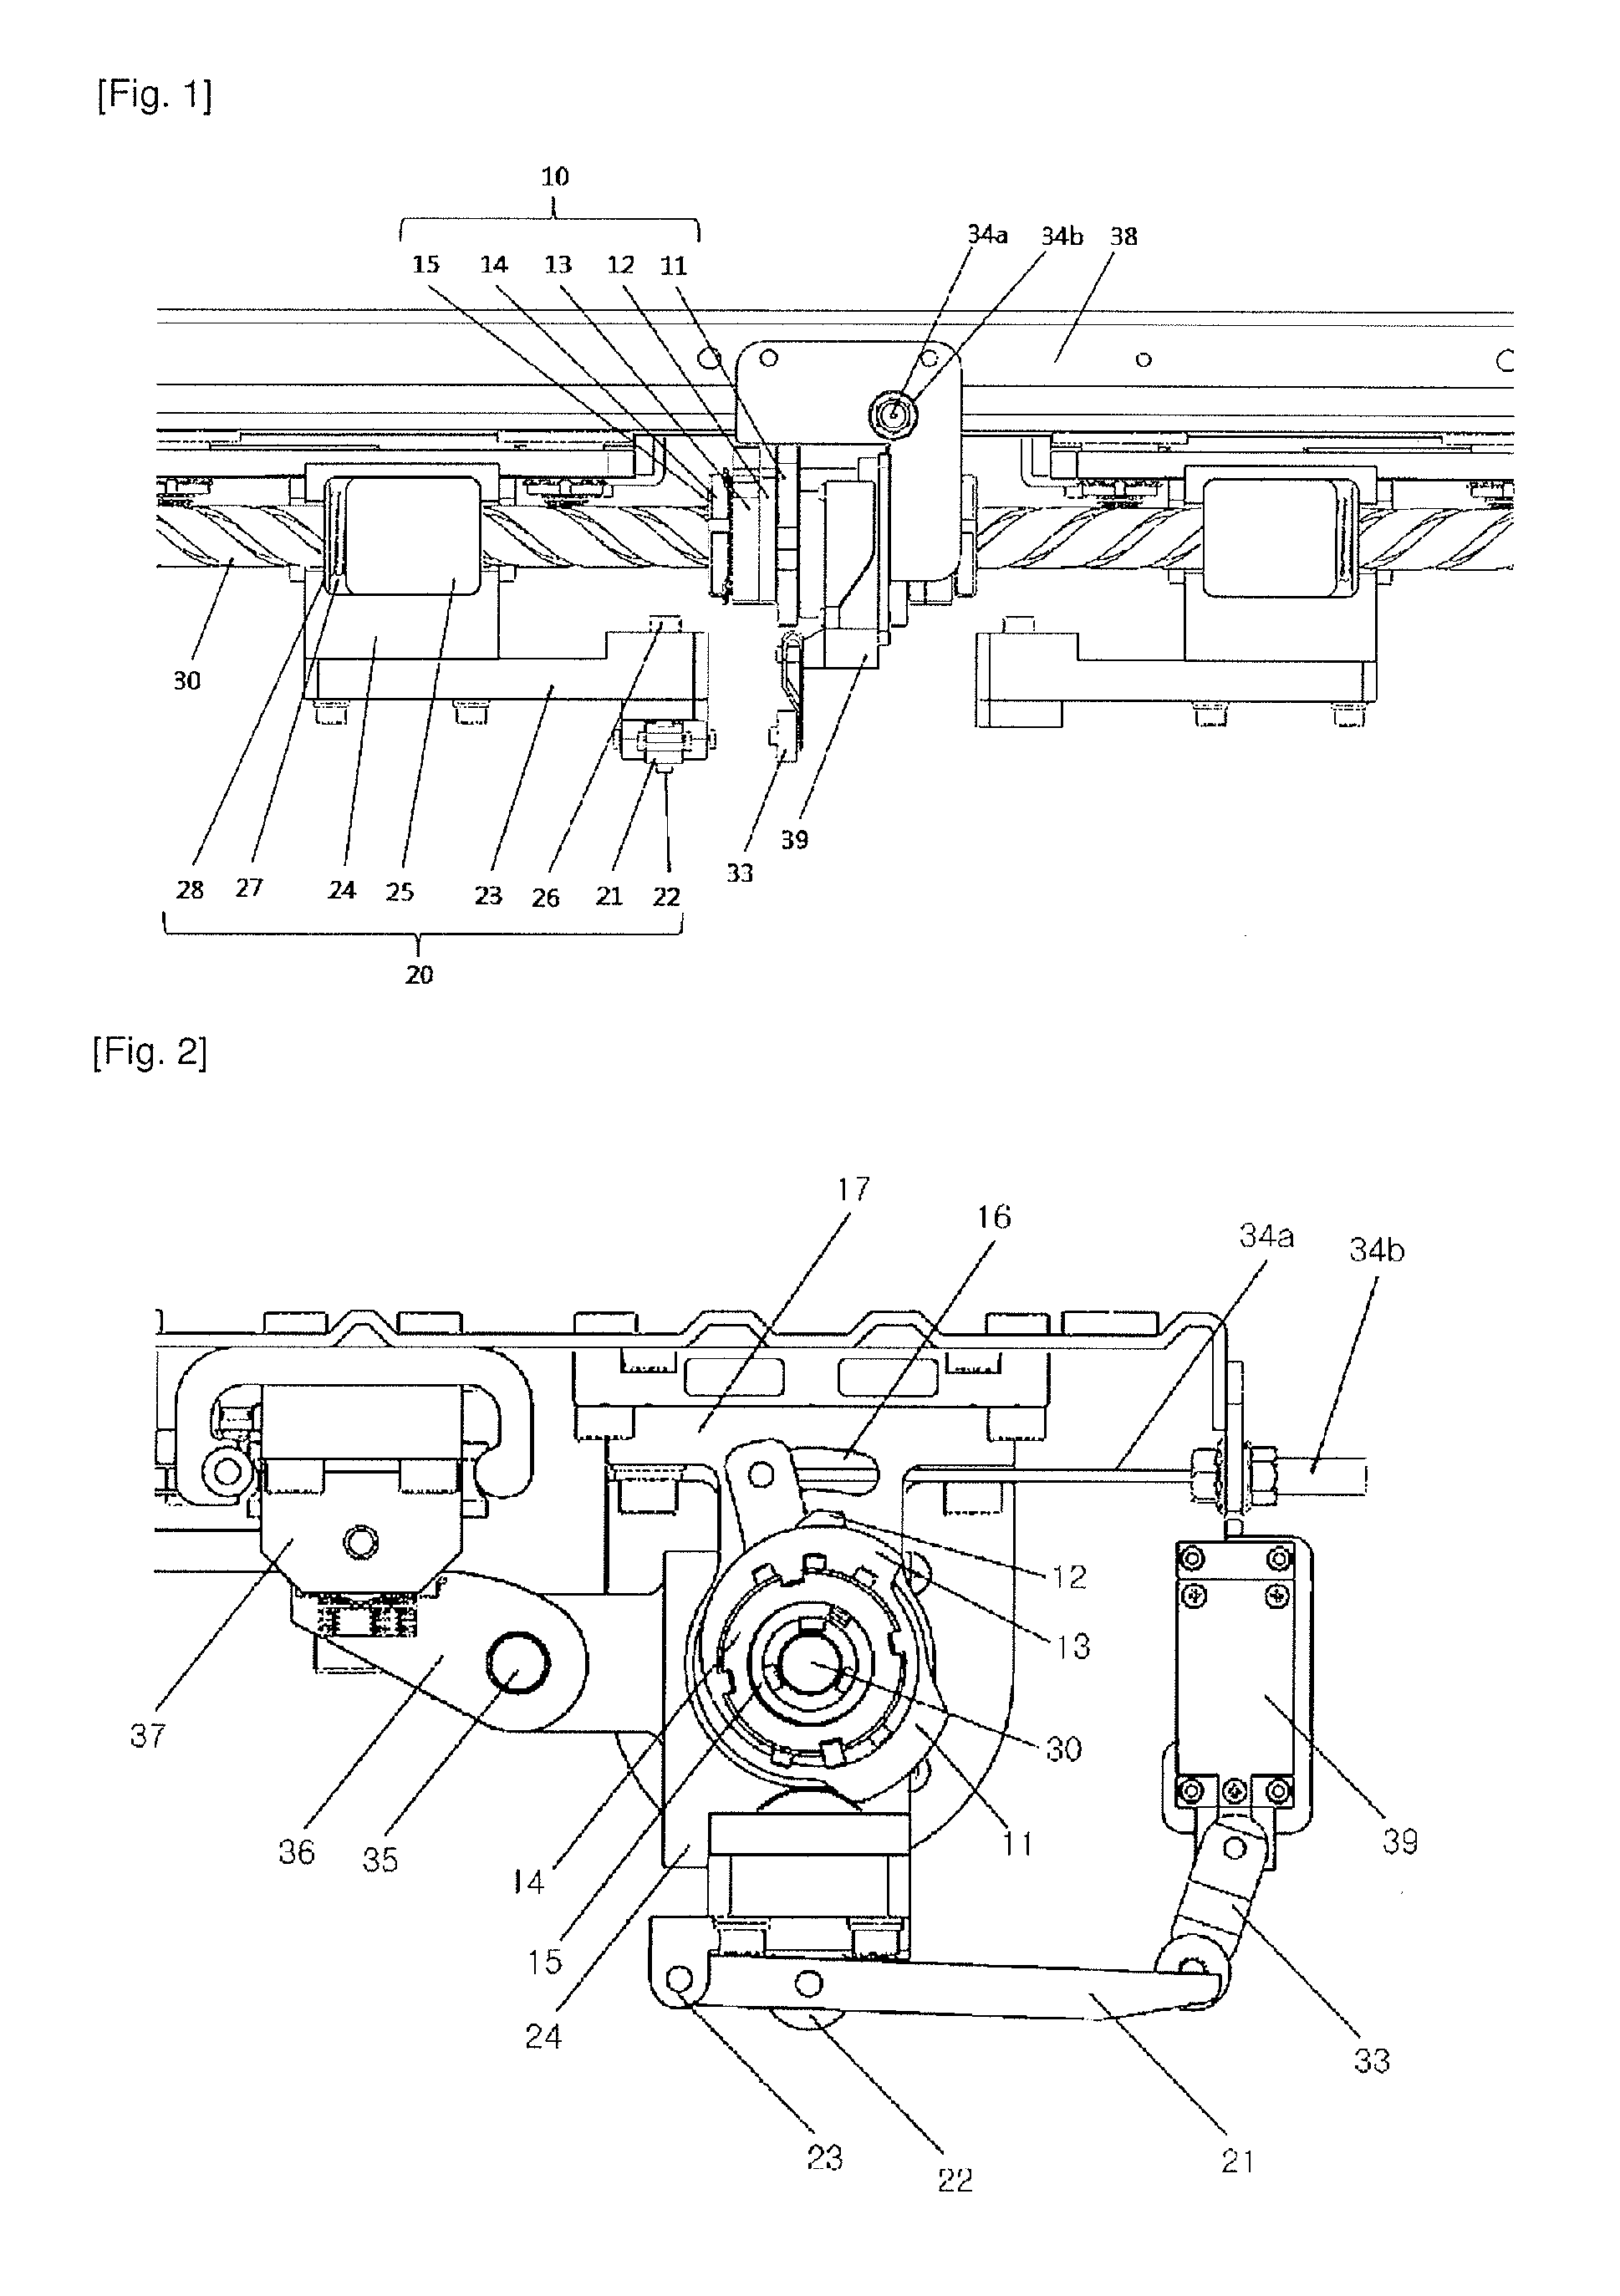 Electric door-locking system using a cam